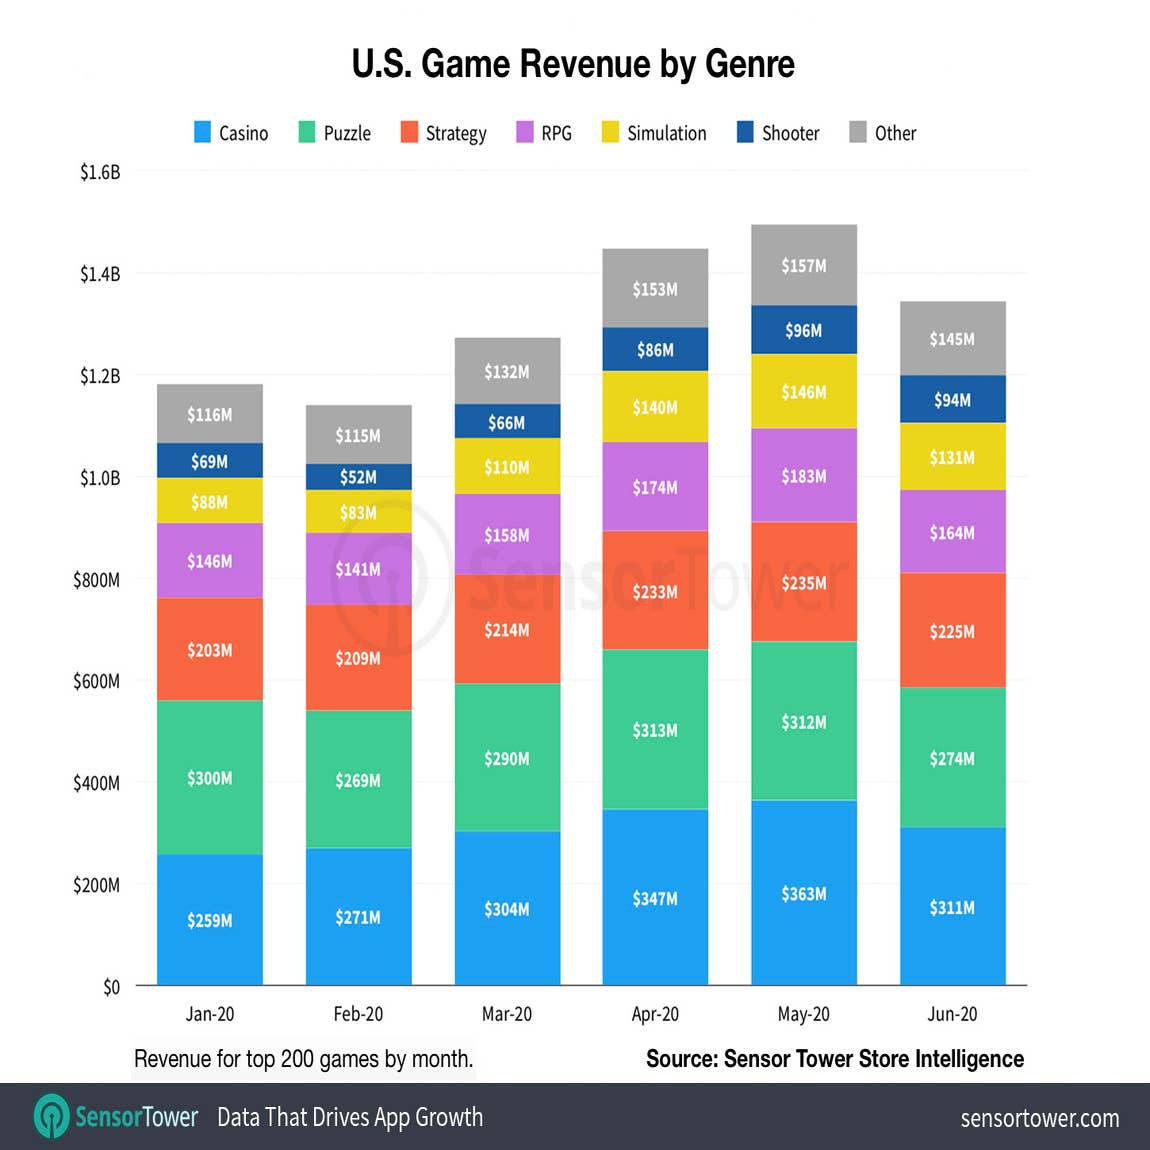 🎮 The Top Mobile Games by Downloads and Revenue in July